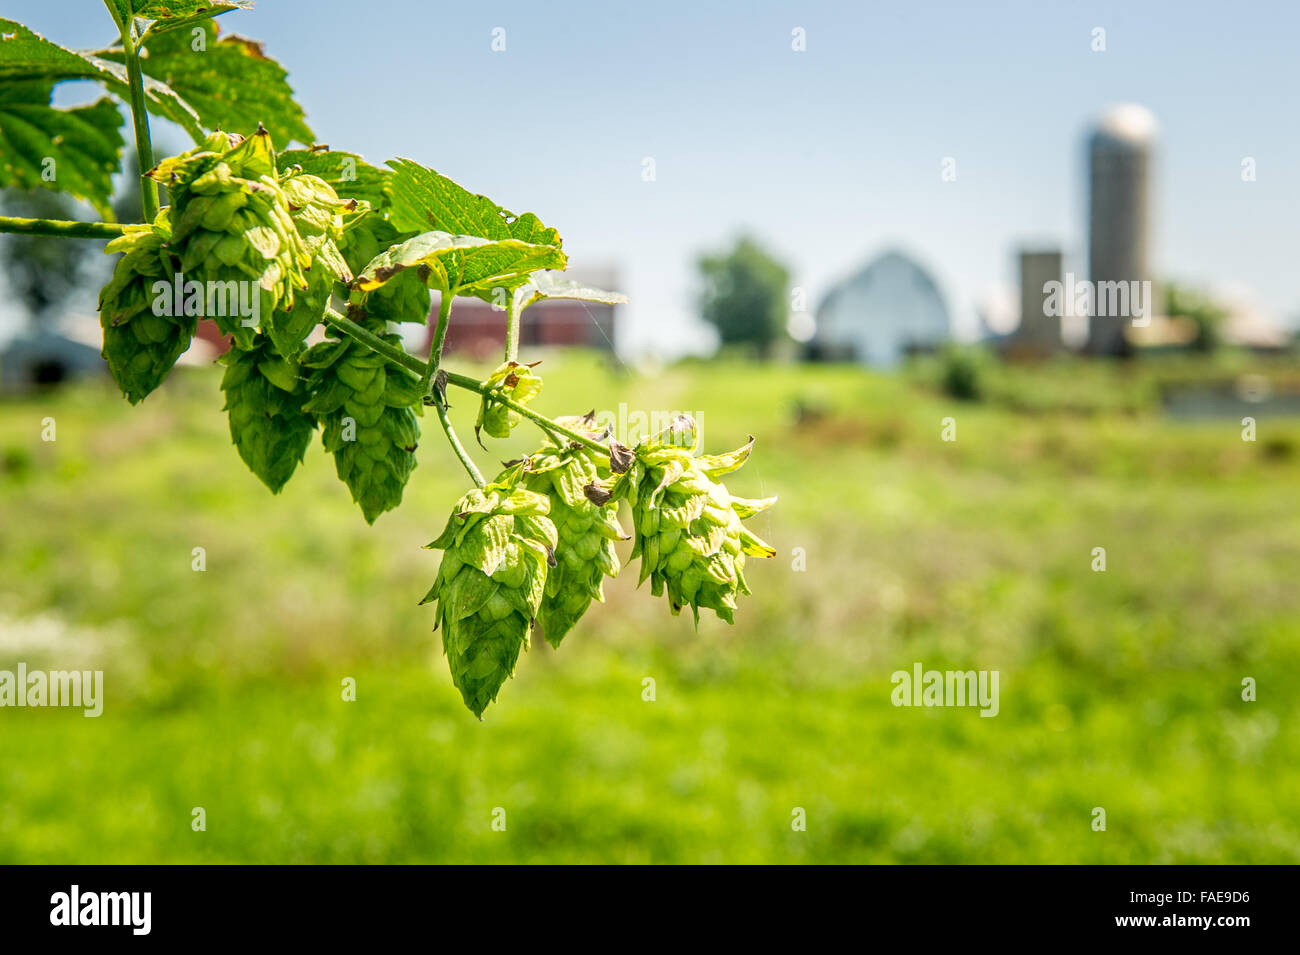 Beer hops being grown on a vine Stock Photo